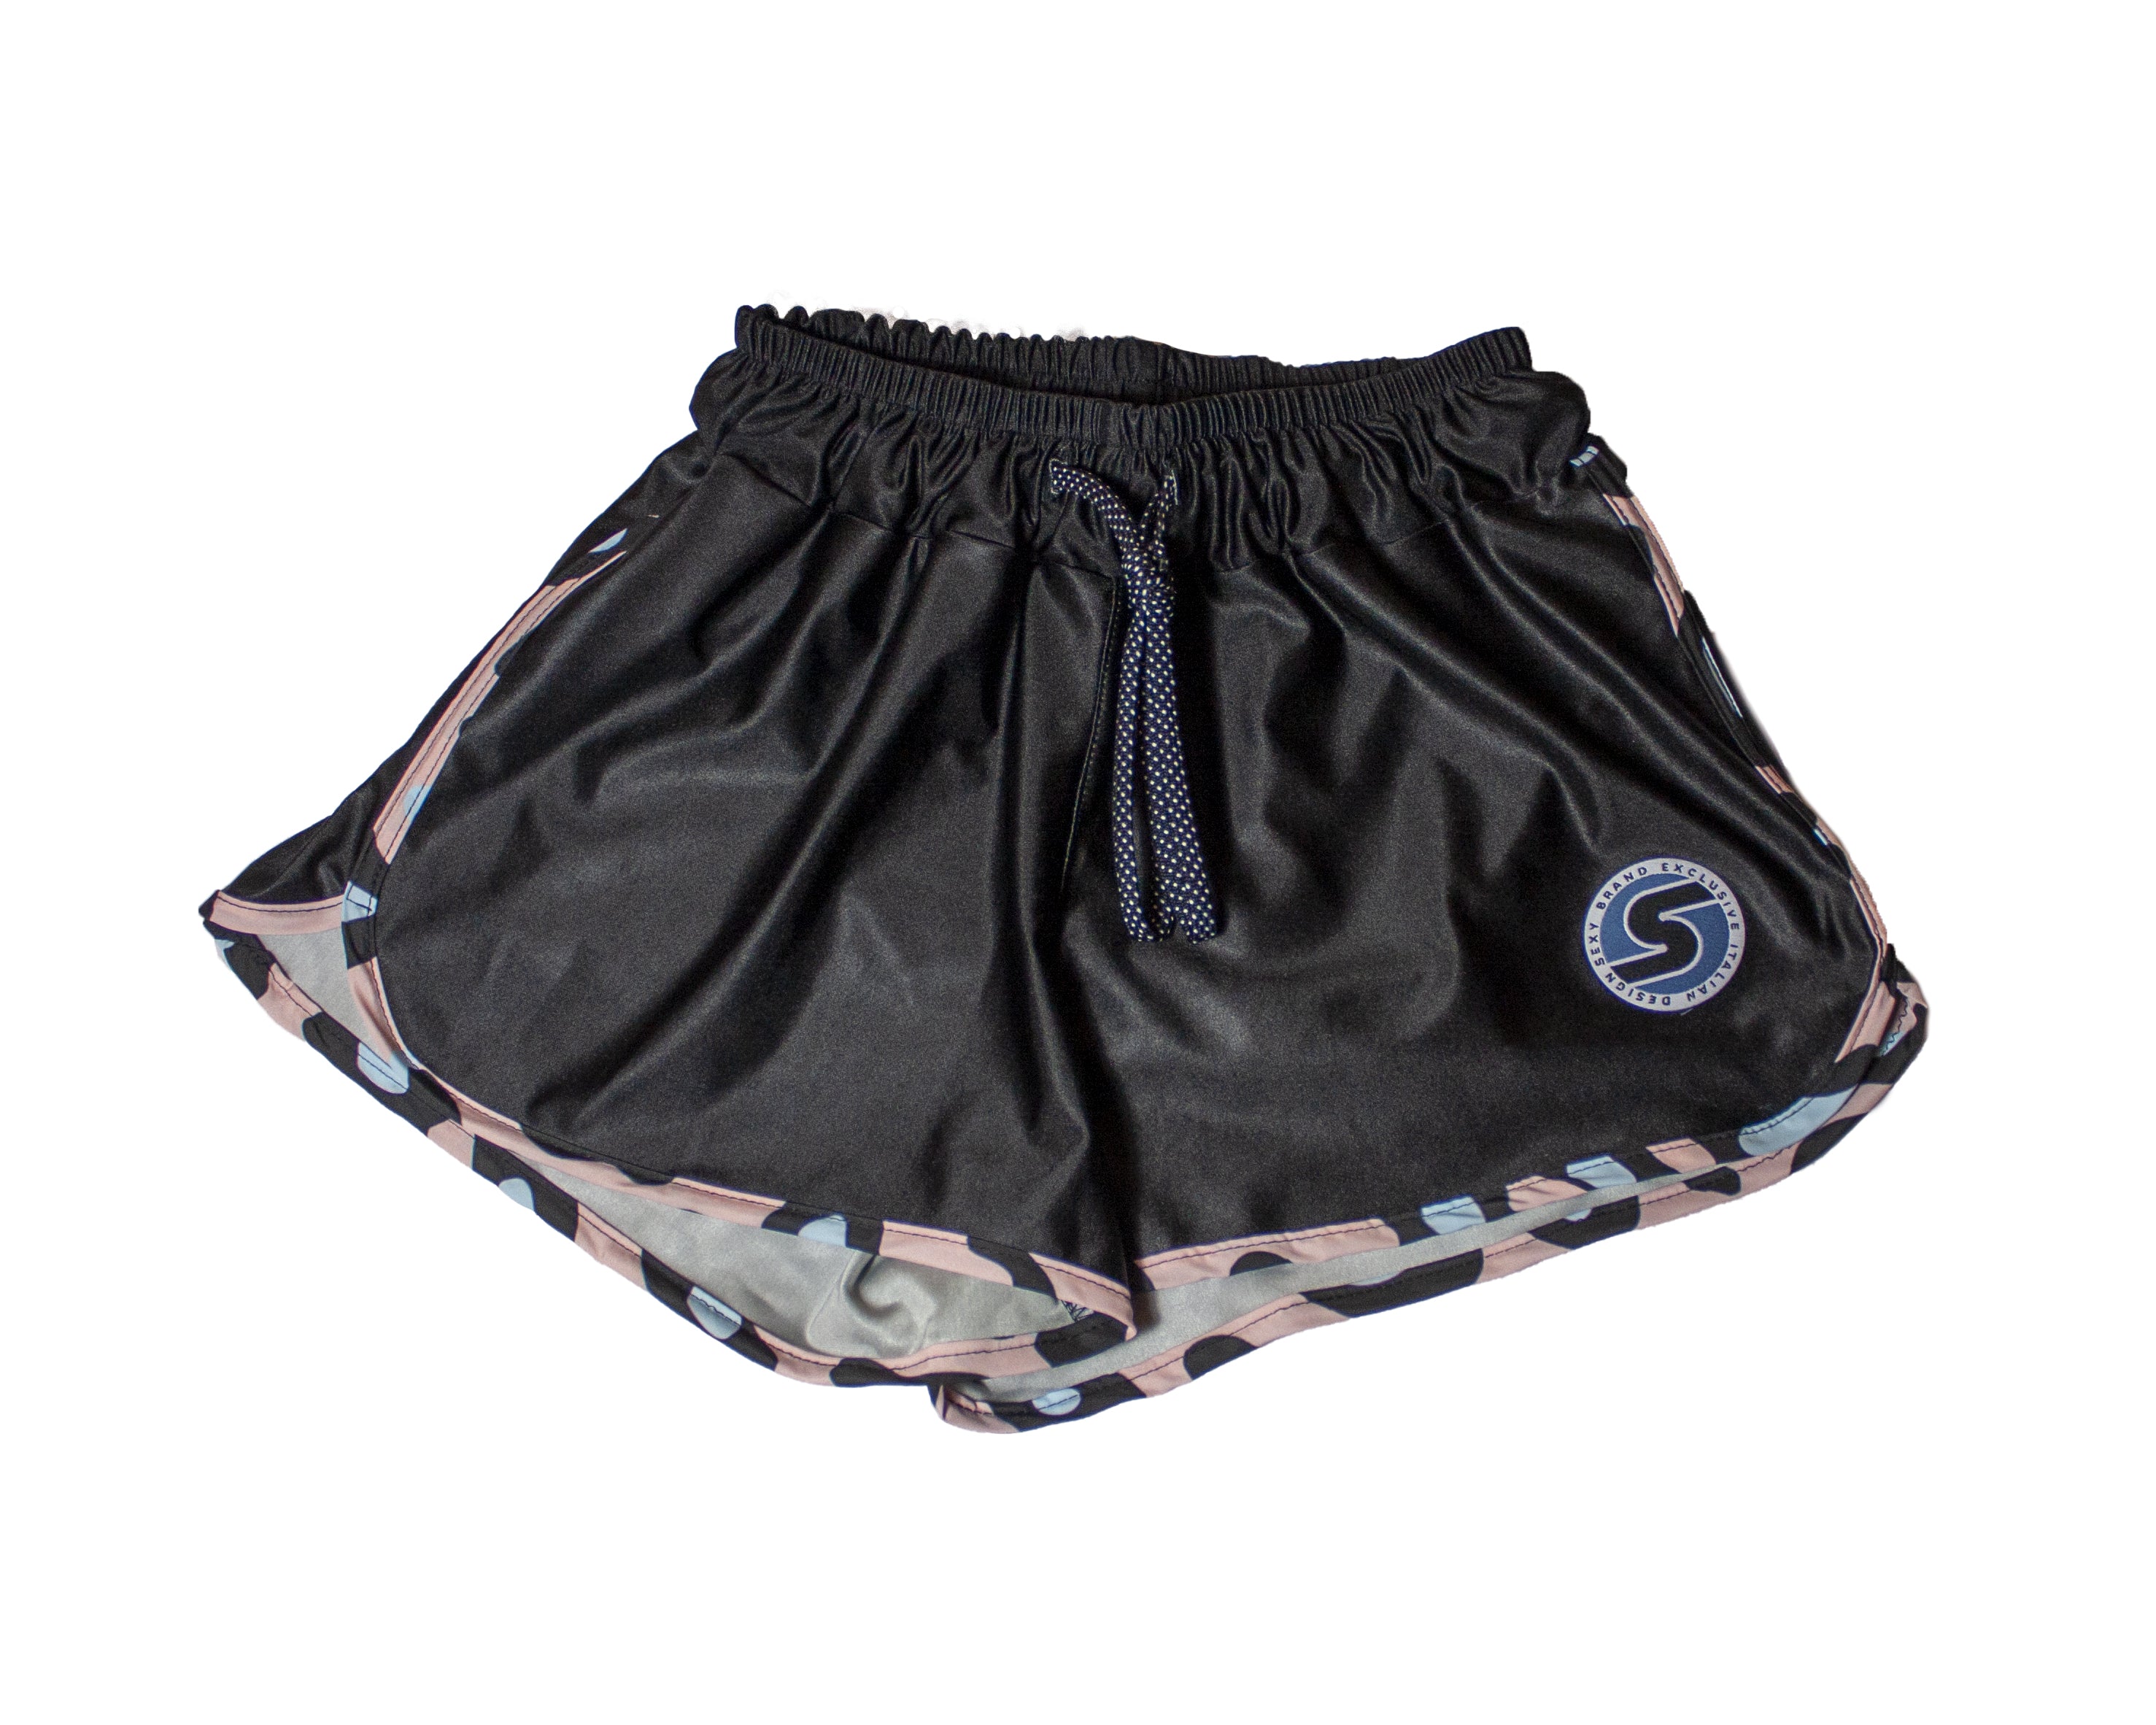 COMPETITION SHORTS WOMAN “PINK LEOPARD” SBE limited Ed.